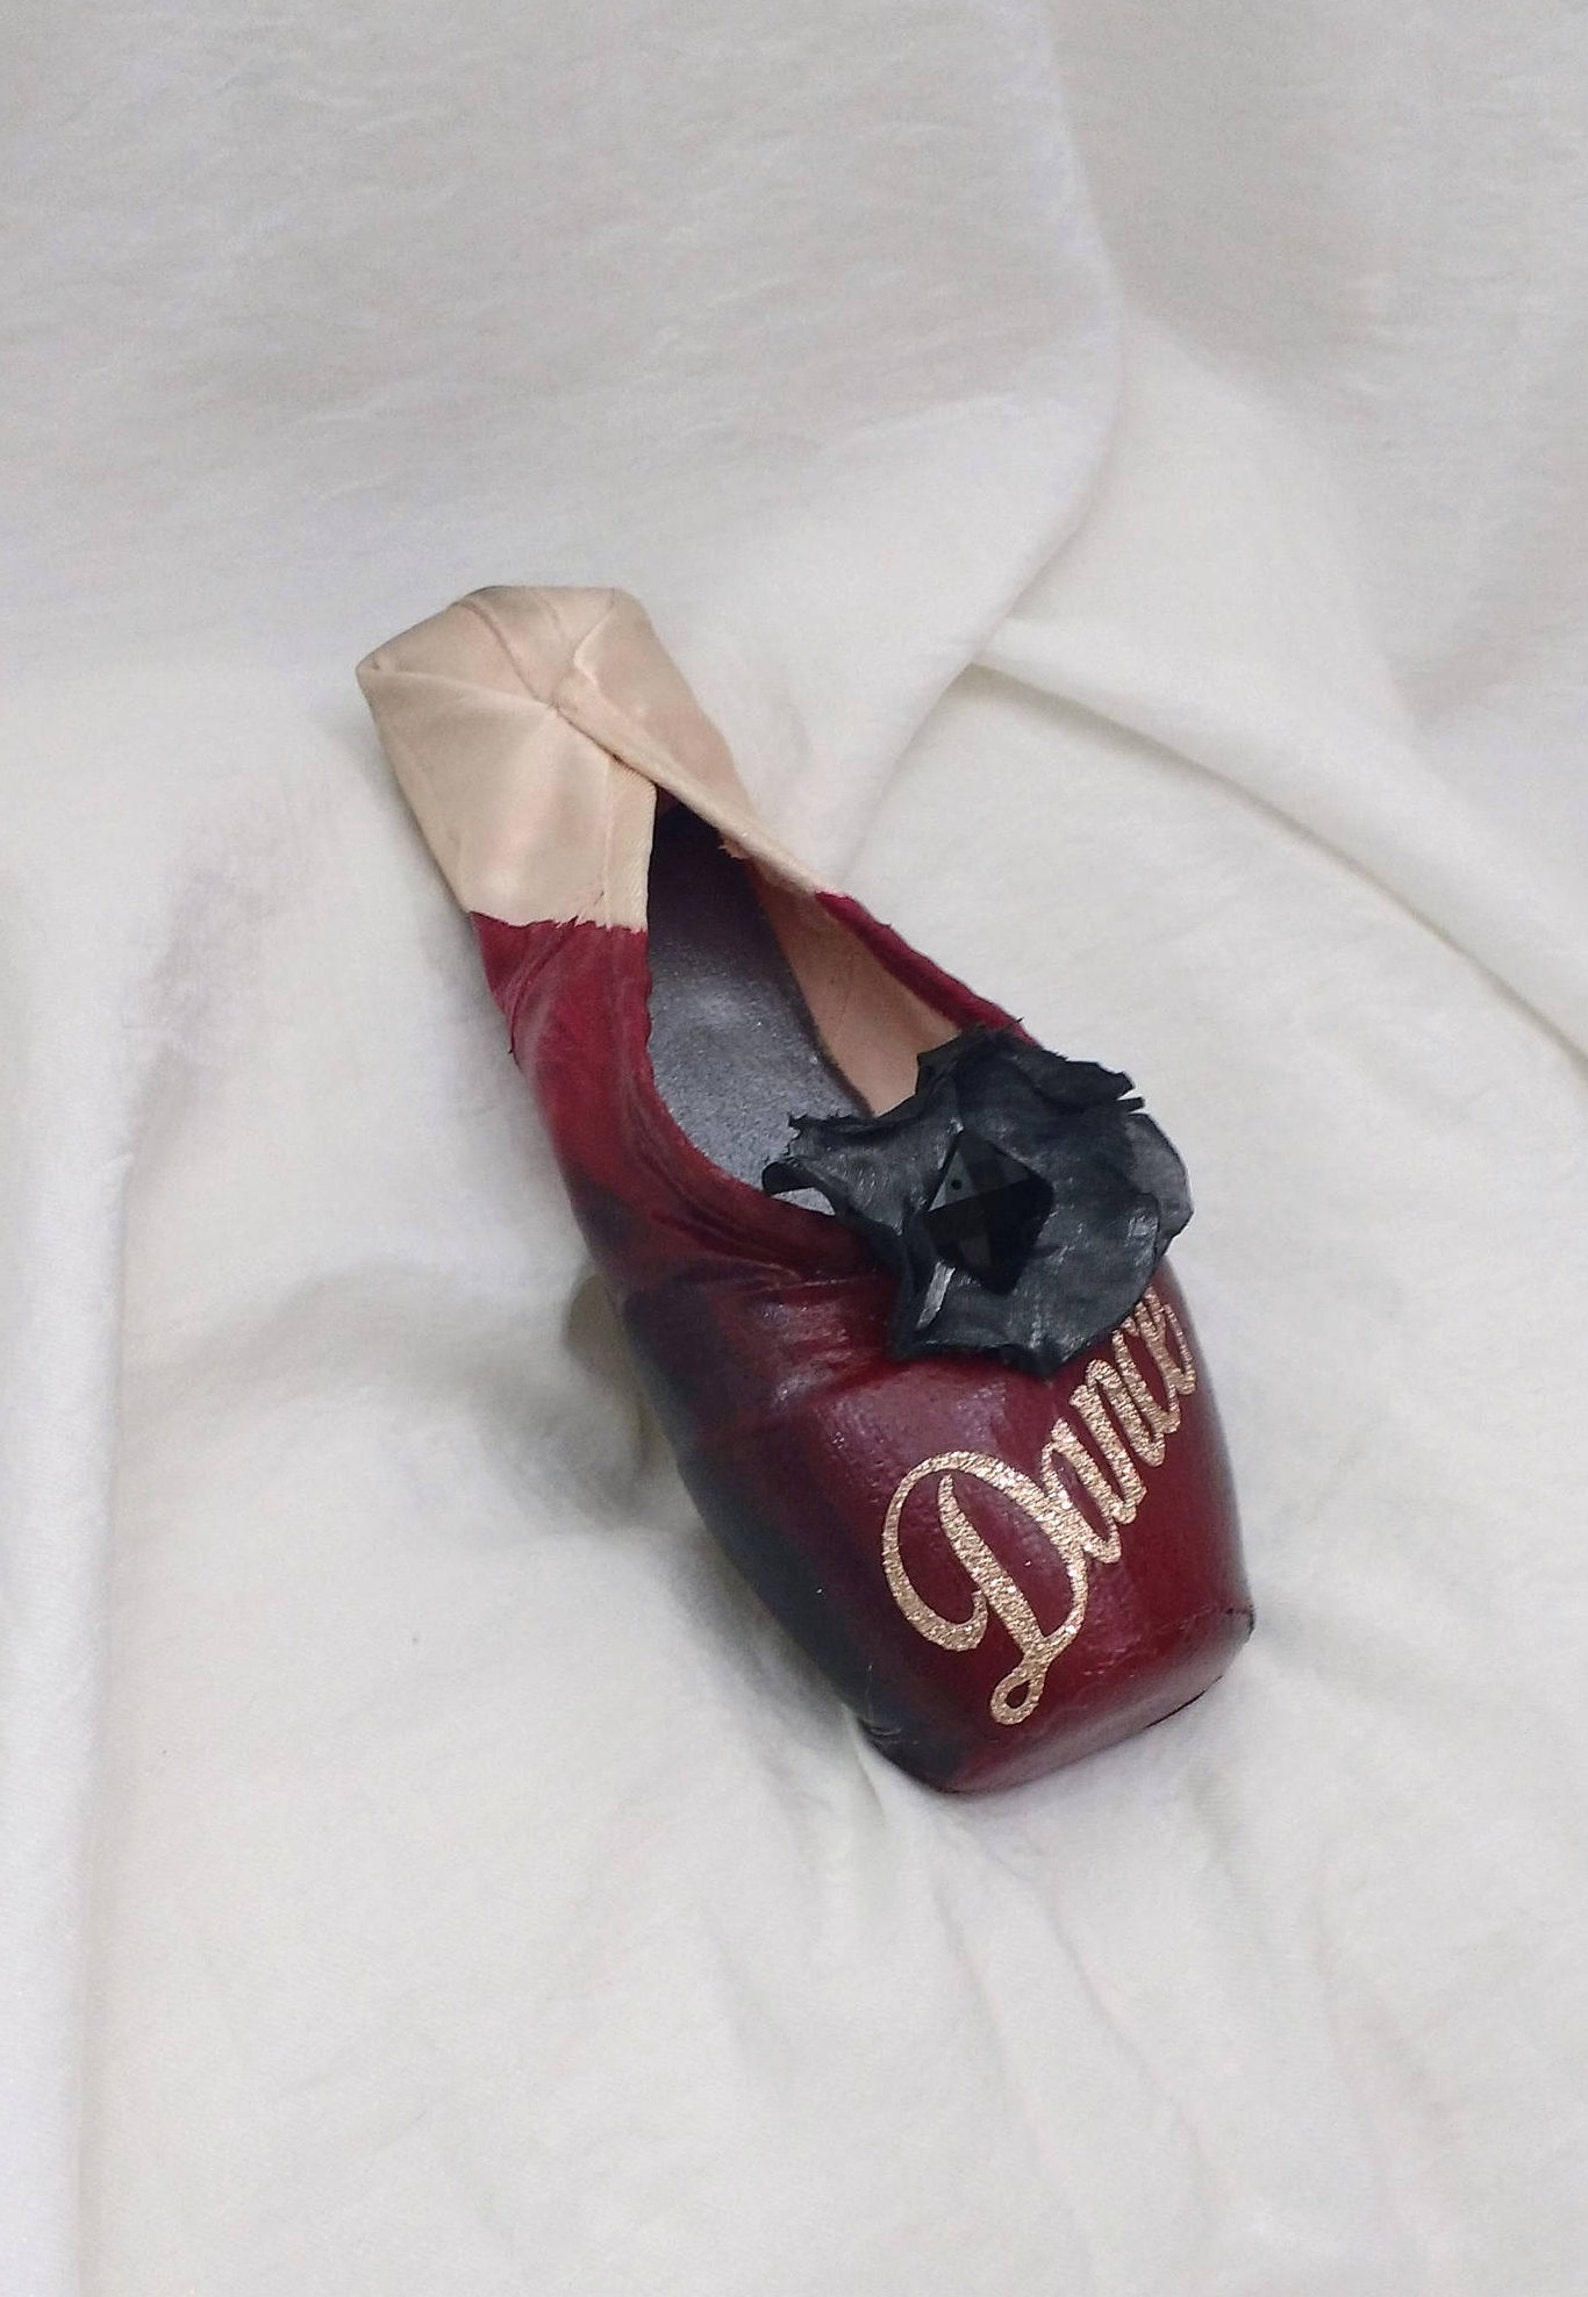 maroon dance decorated pointe shoe, maroon embellished toe shoe, maroon decorated ballet shoe, decorated classical ballet pointe